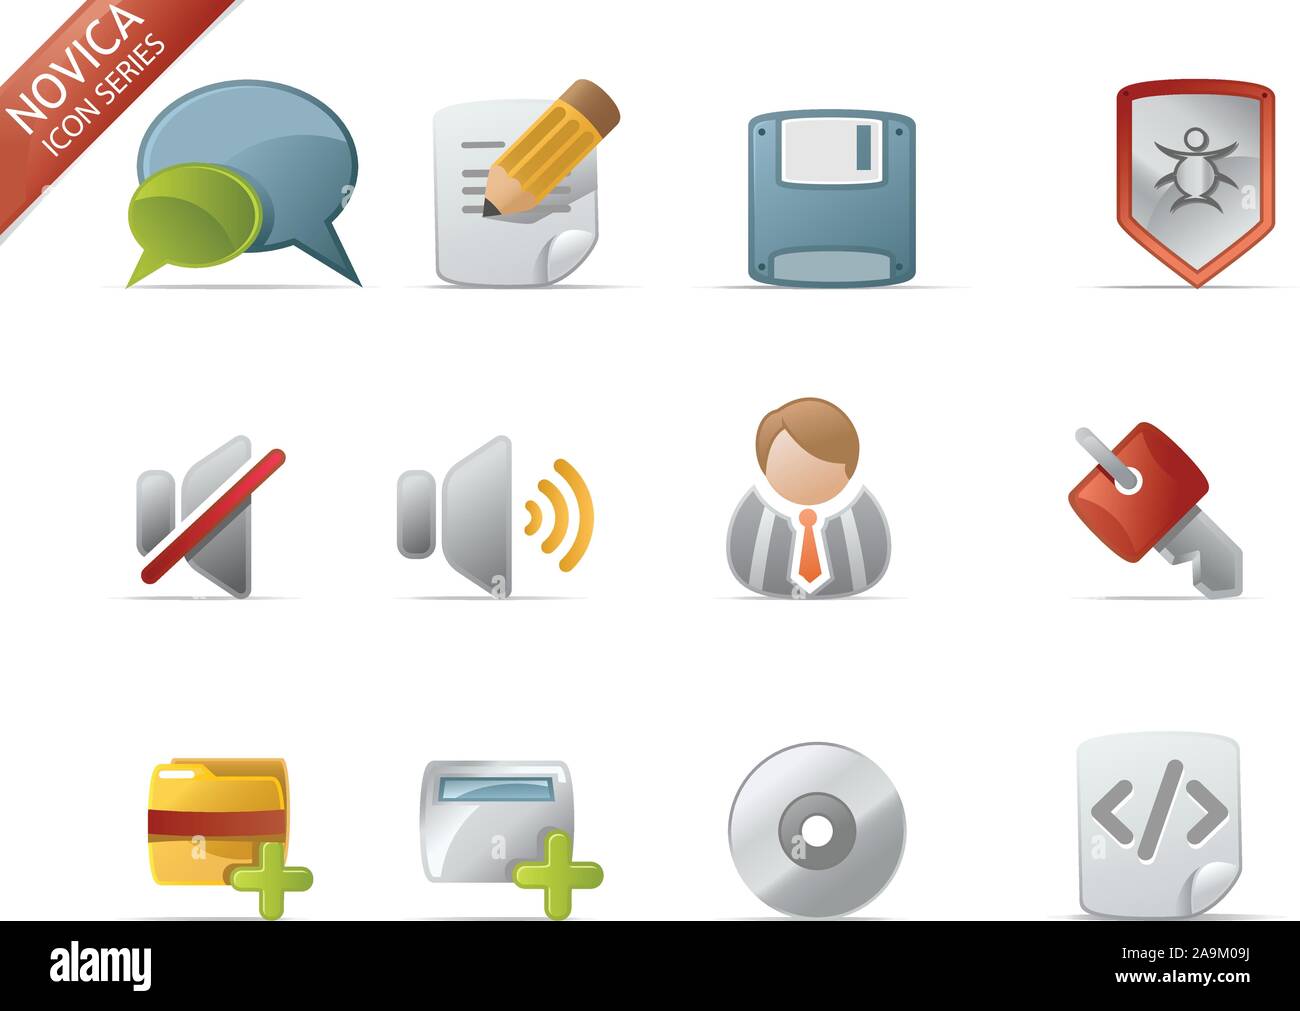 Web and Internet Icons for your website, internet, presentation and application project. web 2.0 style, clean and professional. see more icons in my p Stock Vector